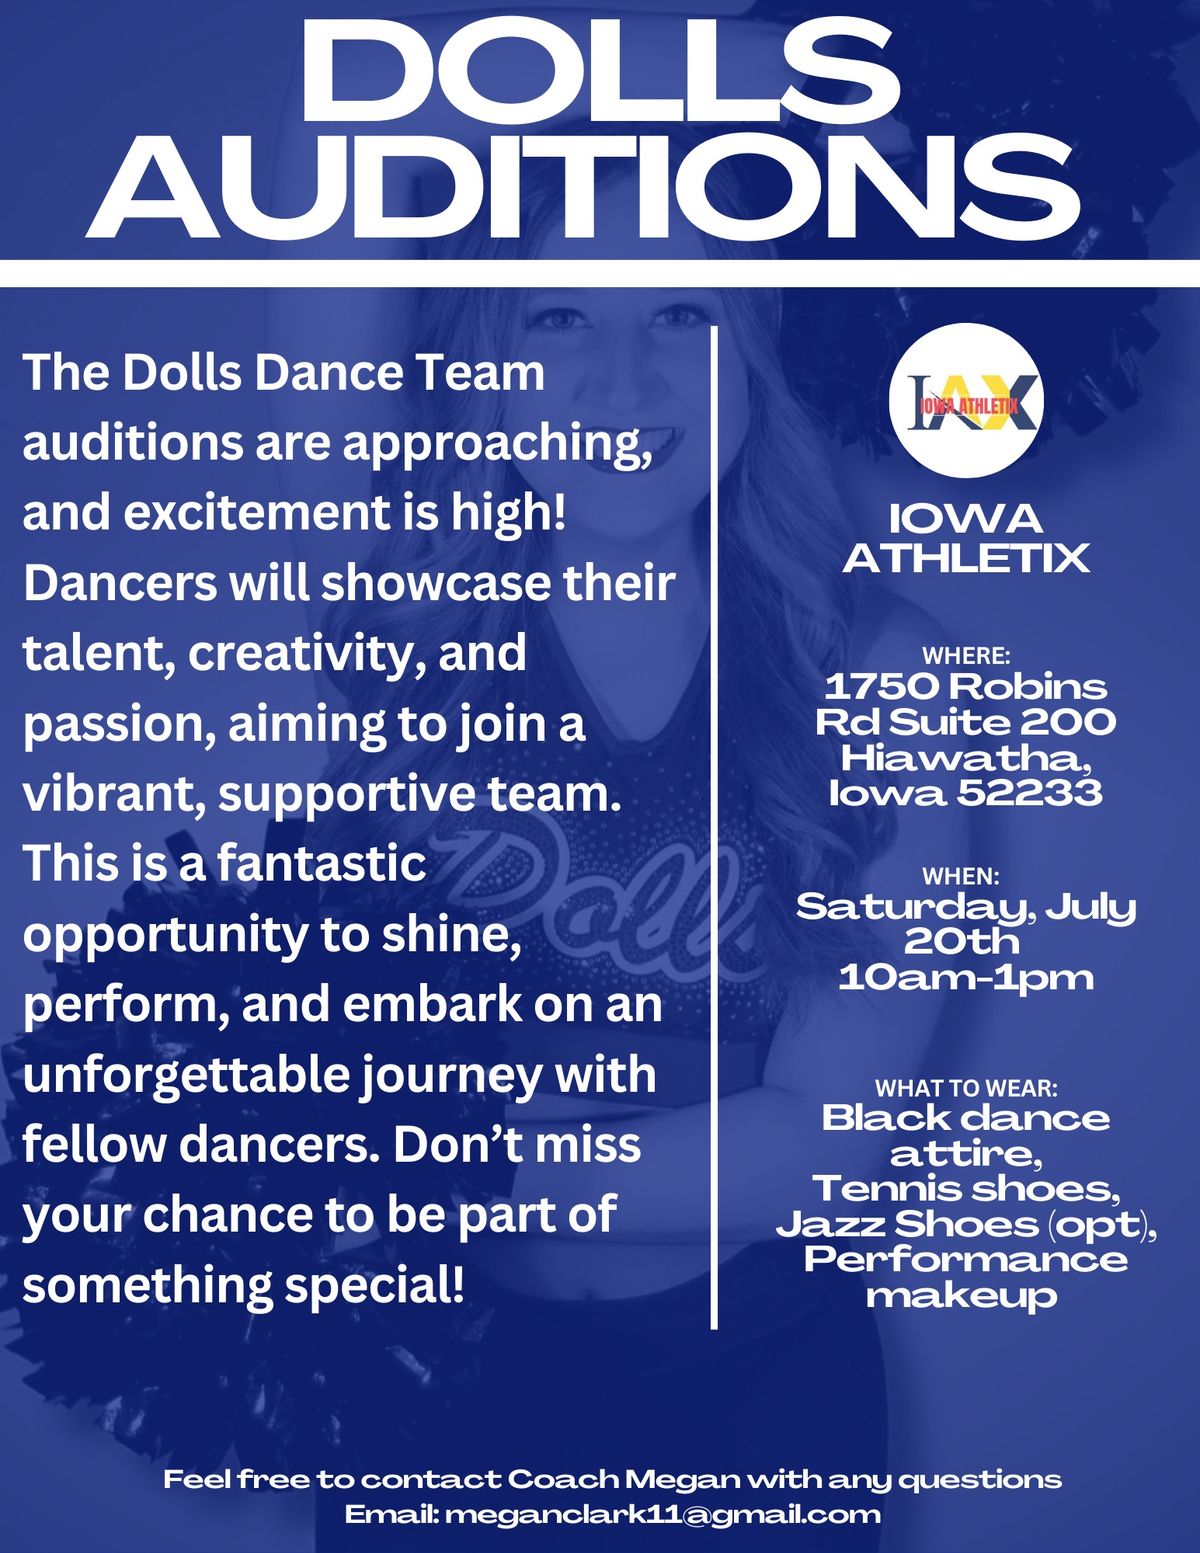 The Dolls Dance Team Auditions